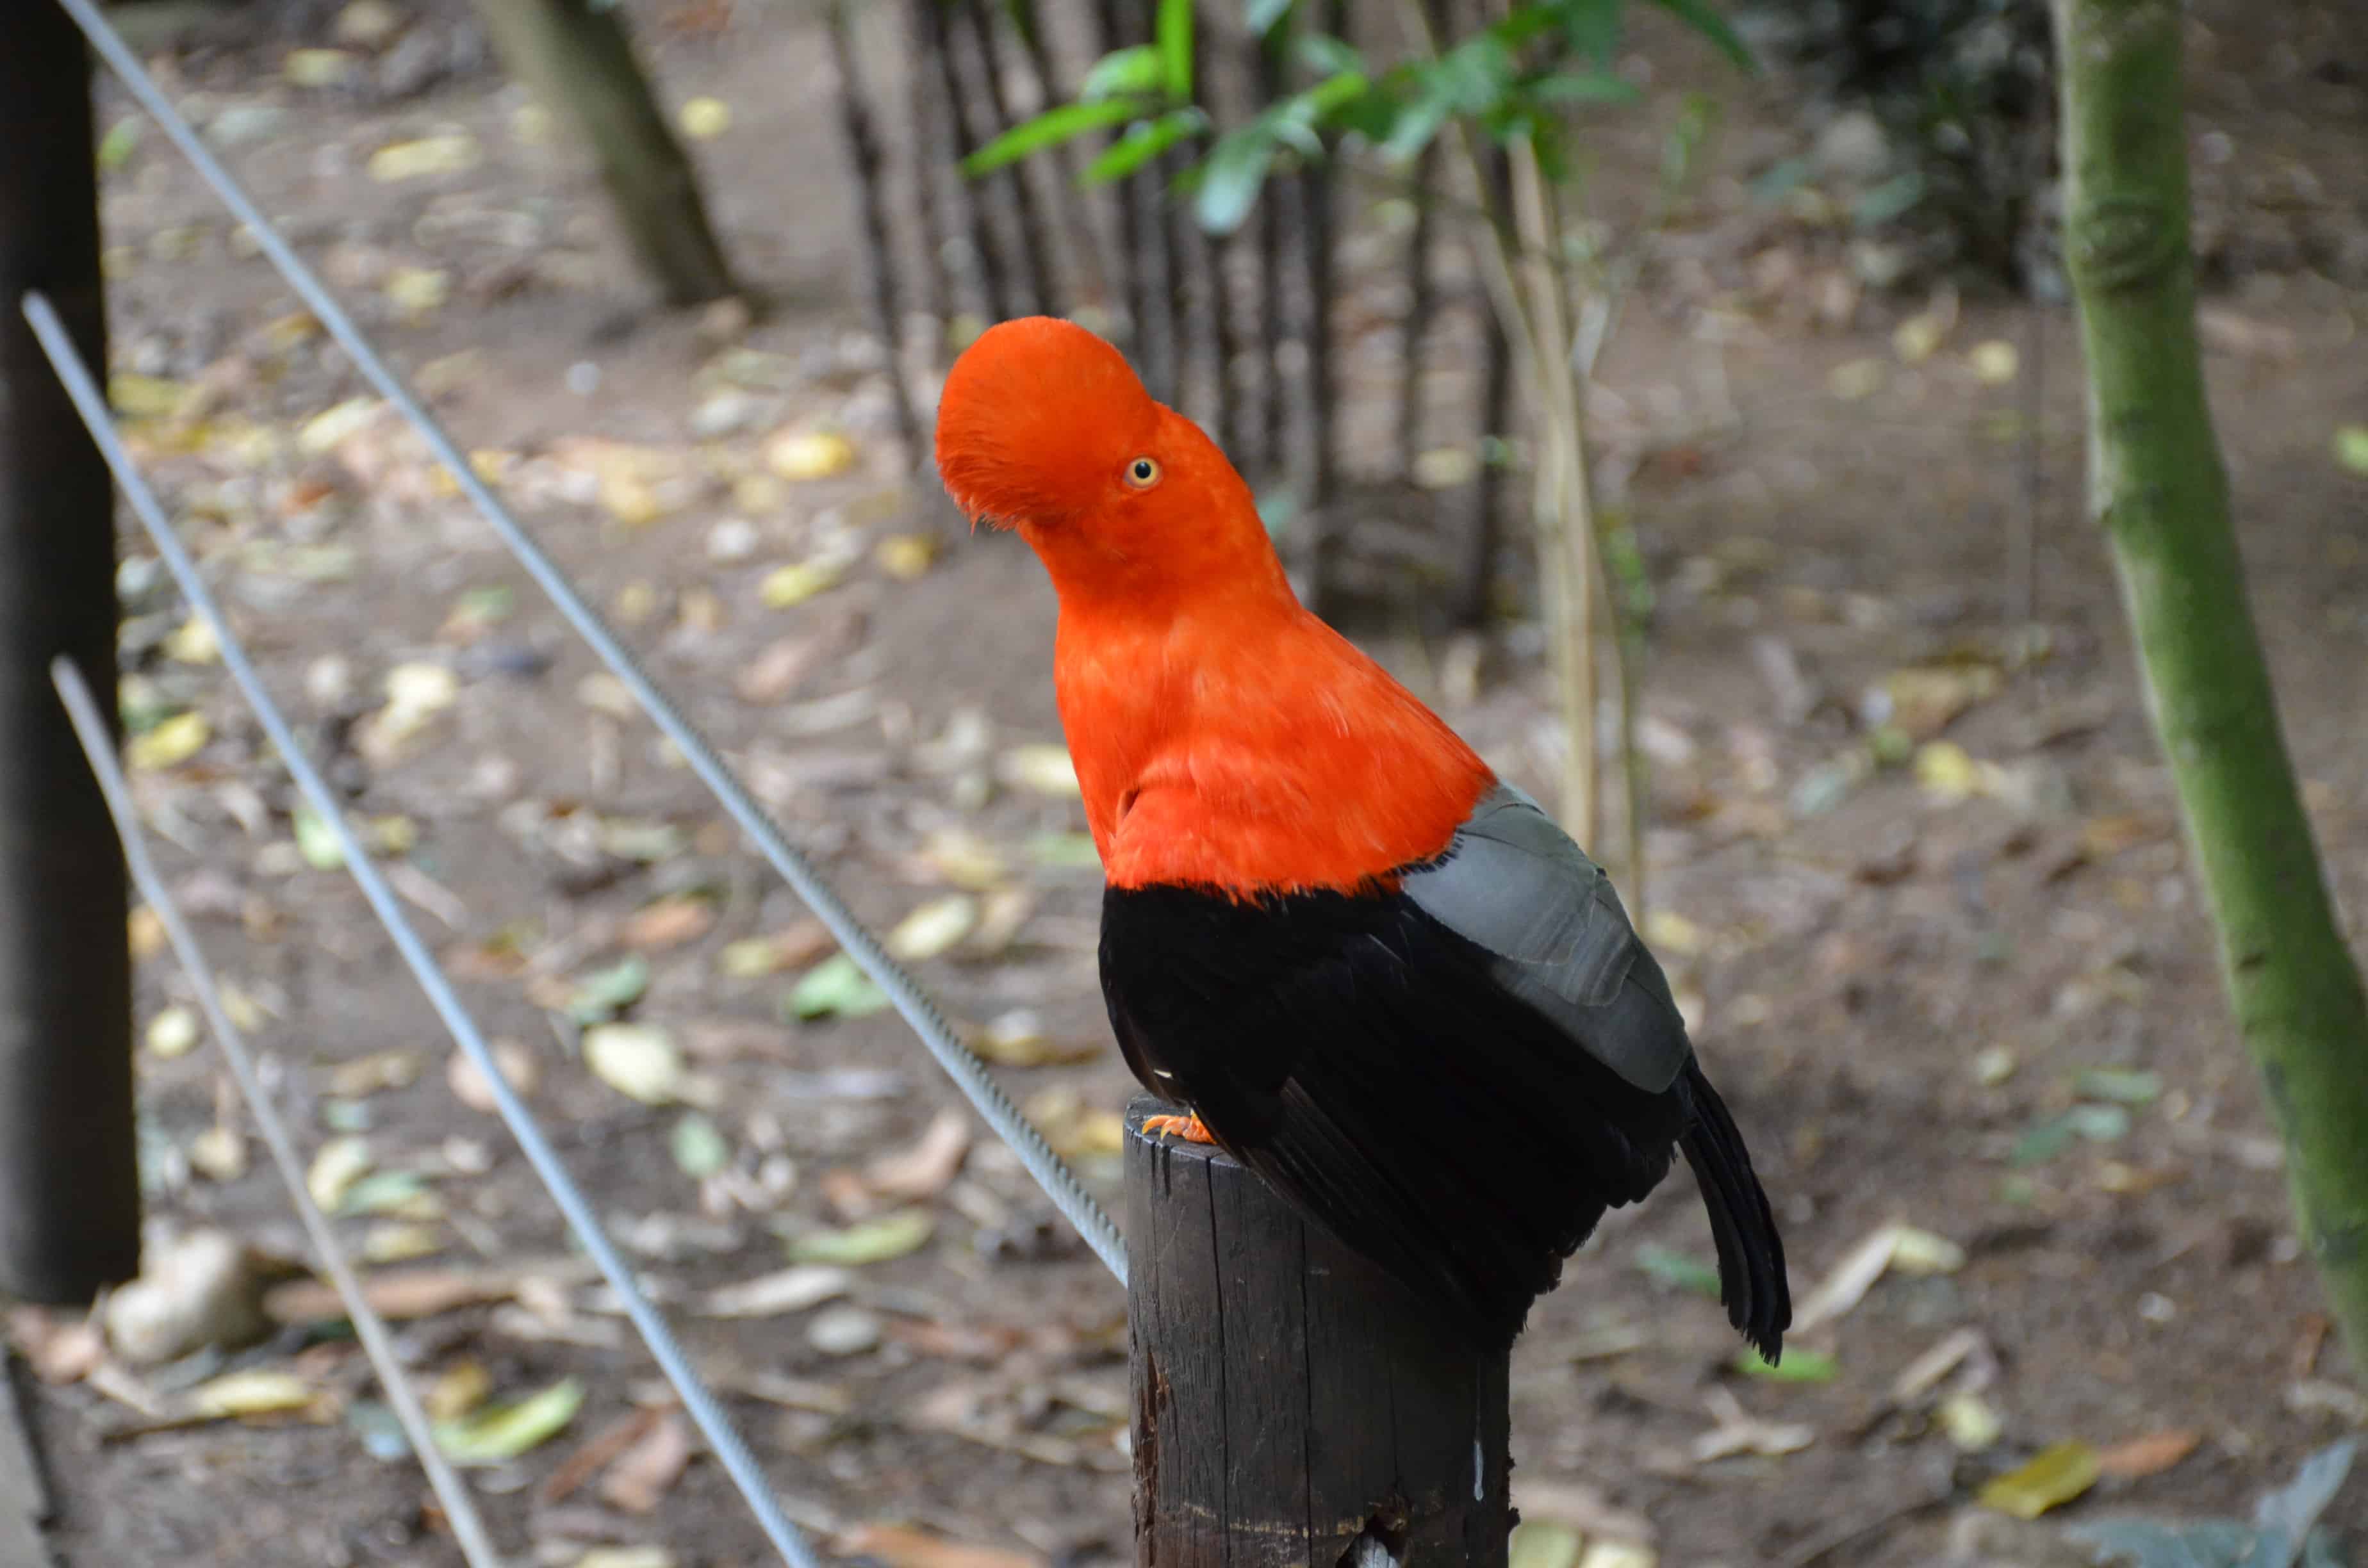 Aviary at the Cali Zoo in Colombia